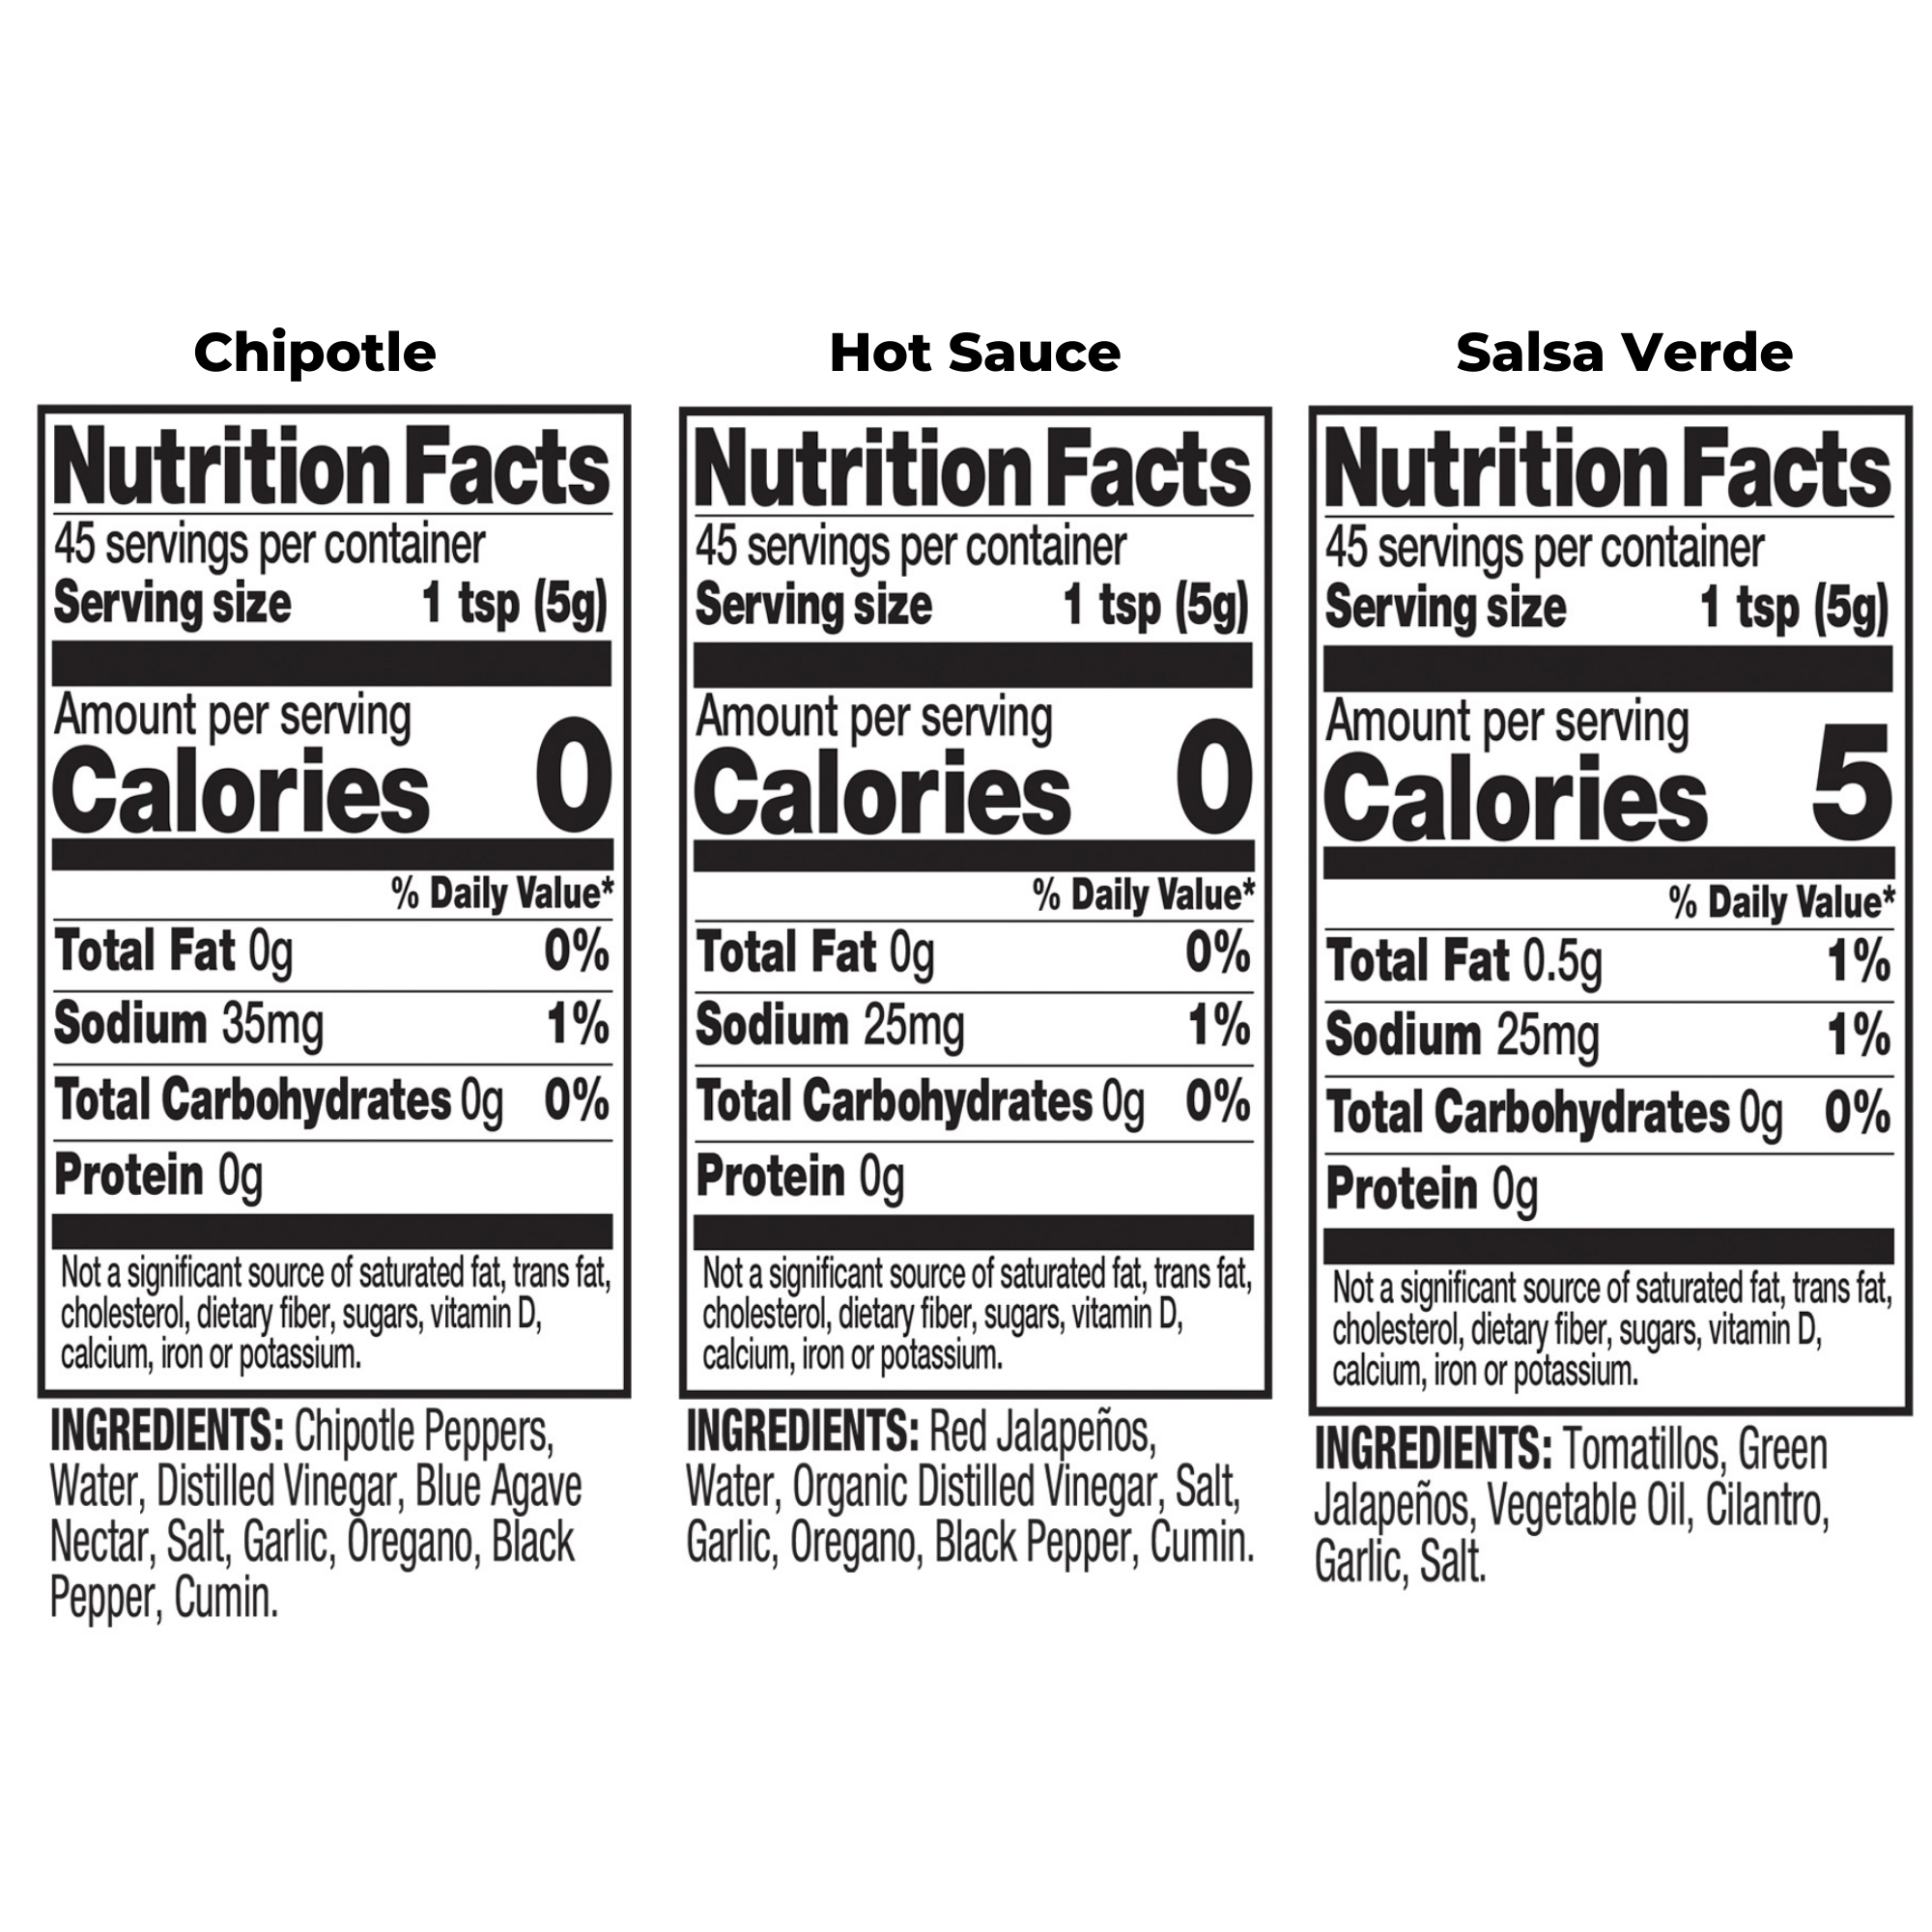 Three Bottle Mixed Pack Nutritional Fact Image